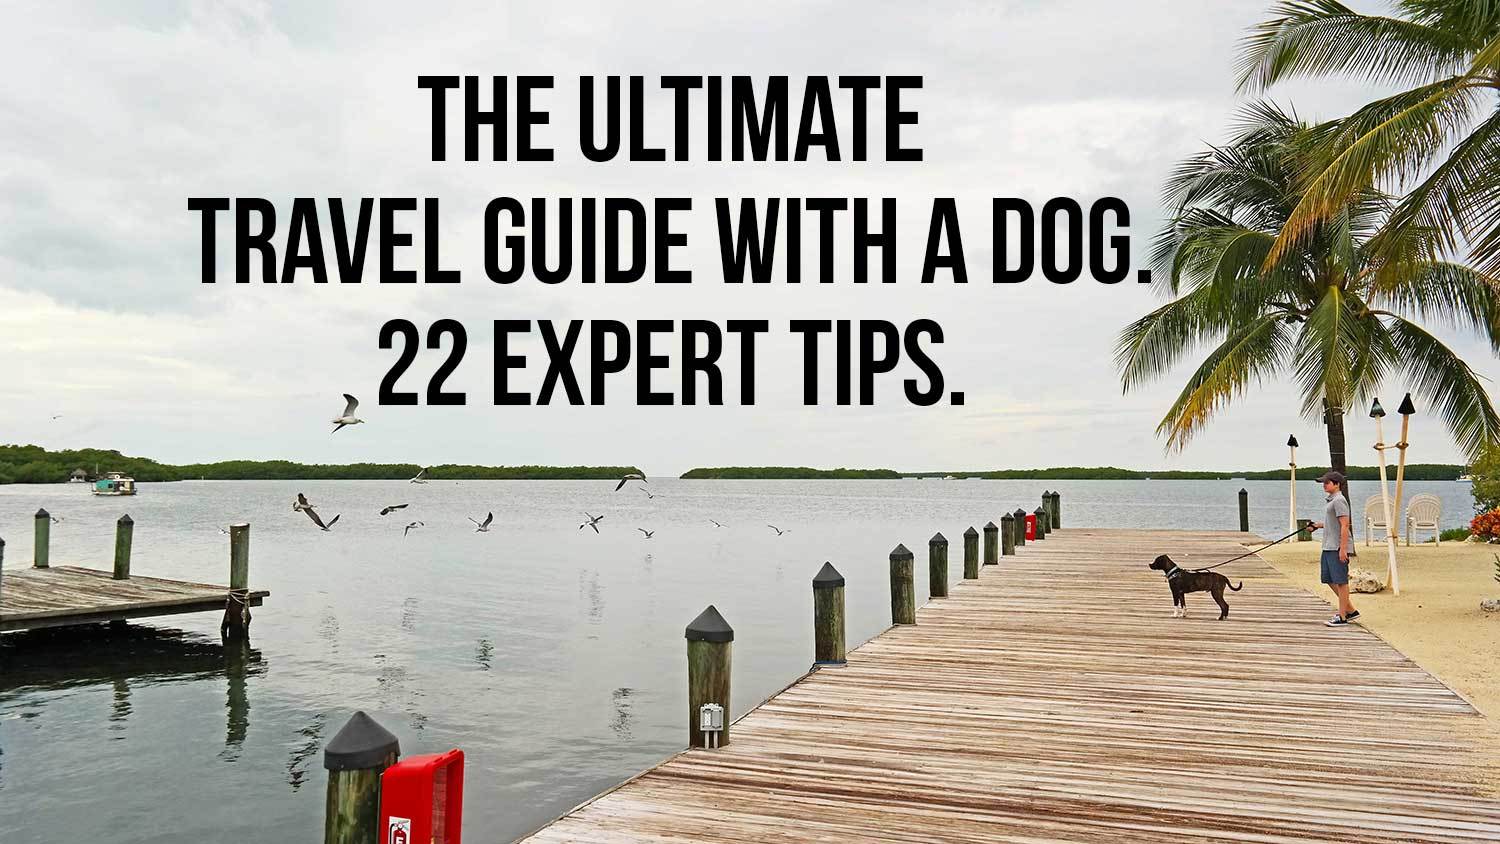 The ultimate travel guide with a dog: 22 expert tips!